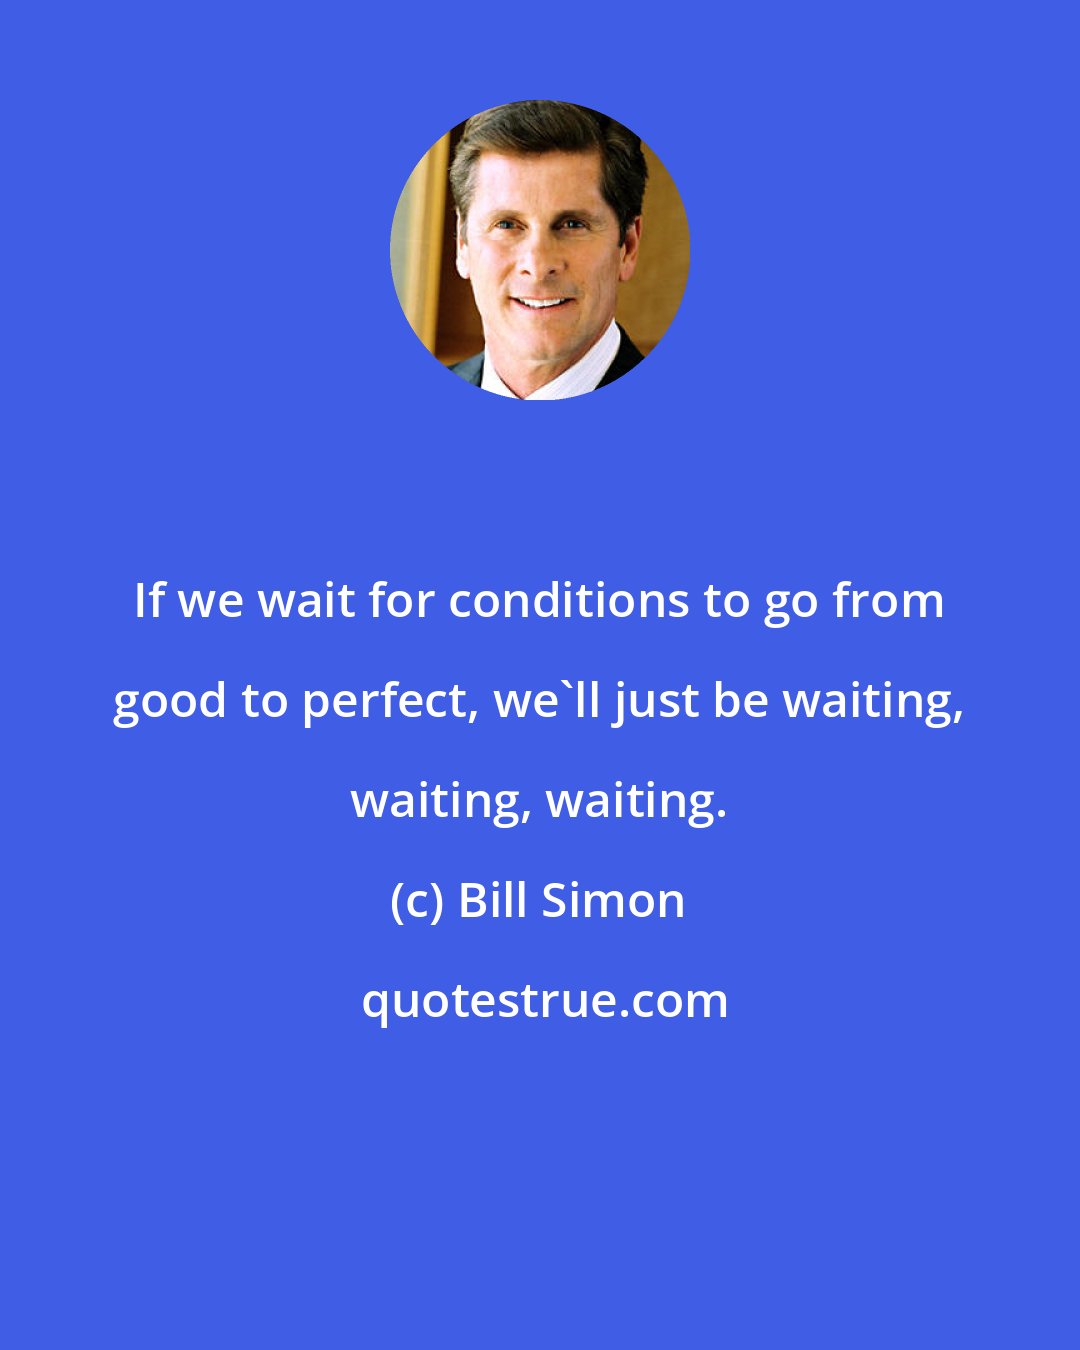 Bill Simon: If we wait for conditions to go from good to perfect, we'll just be waiting, waiting, waiting.